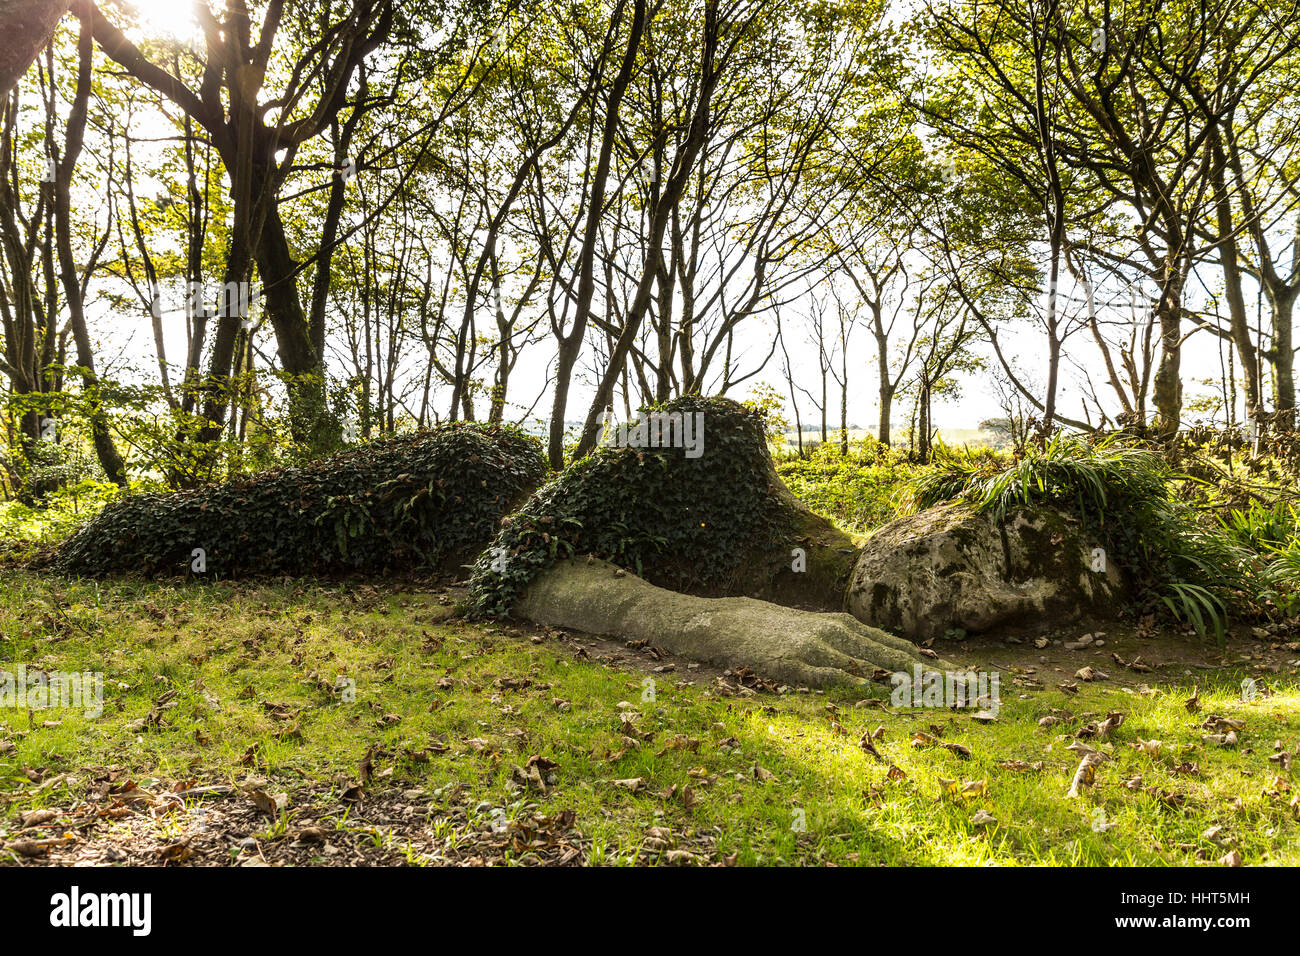 The Mud Maid, Woodland Walk. The Lost Gardens of Heligans, St Austell, Cornwall, UK Stock Photo